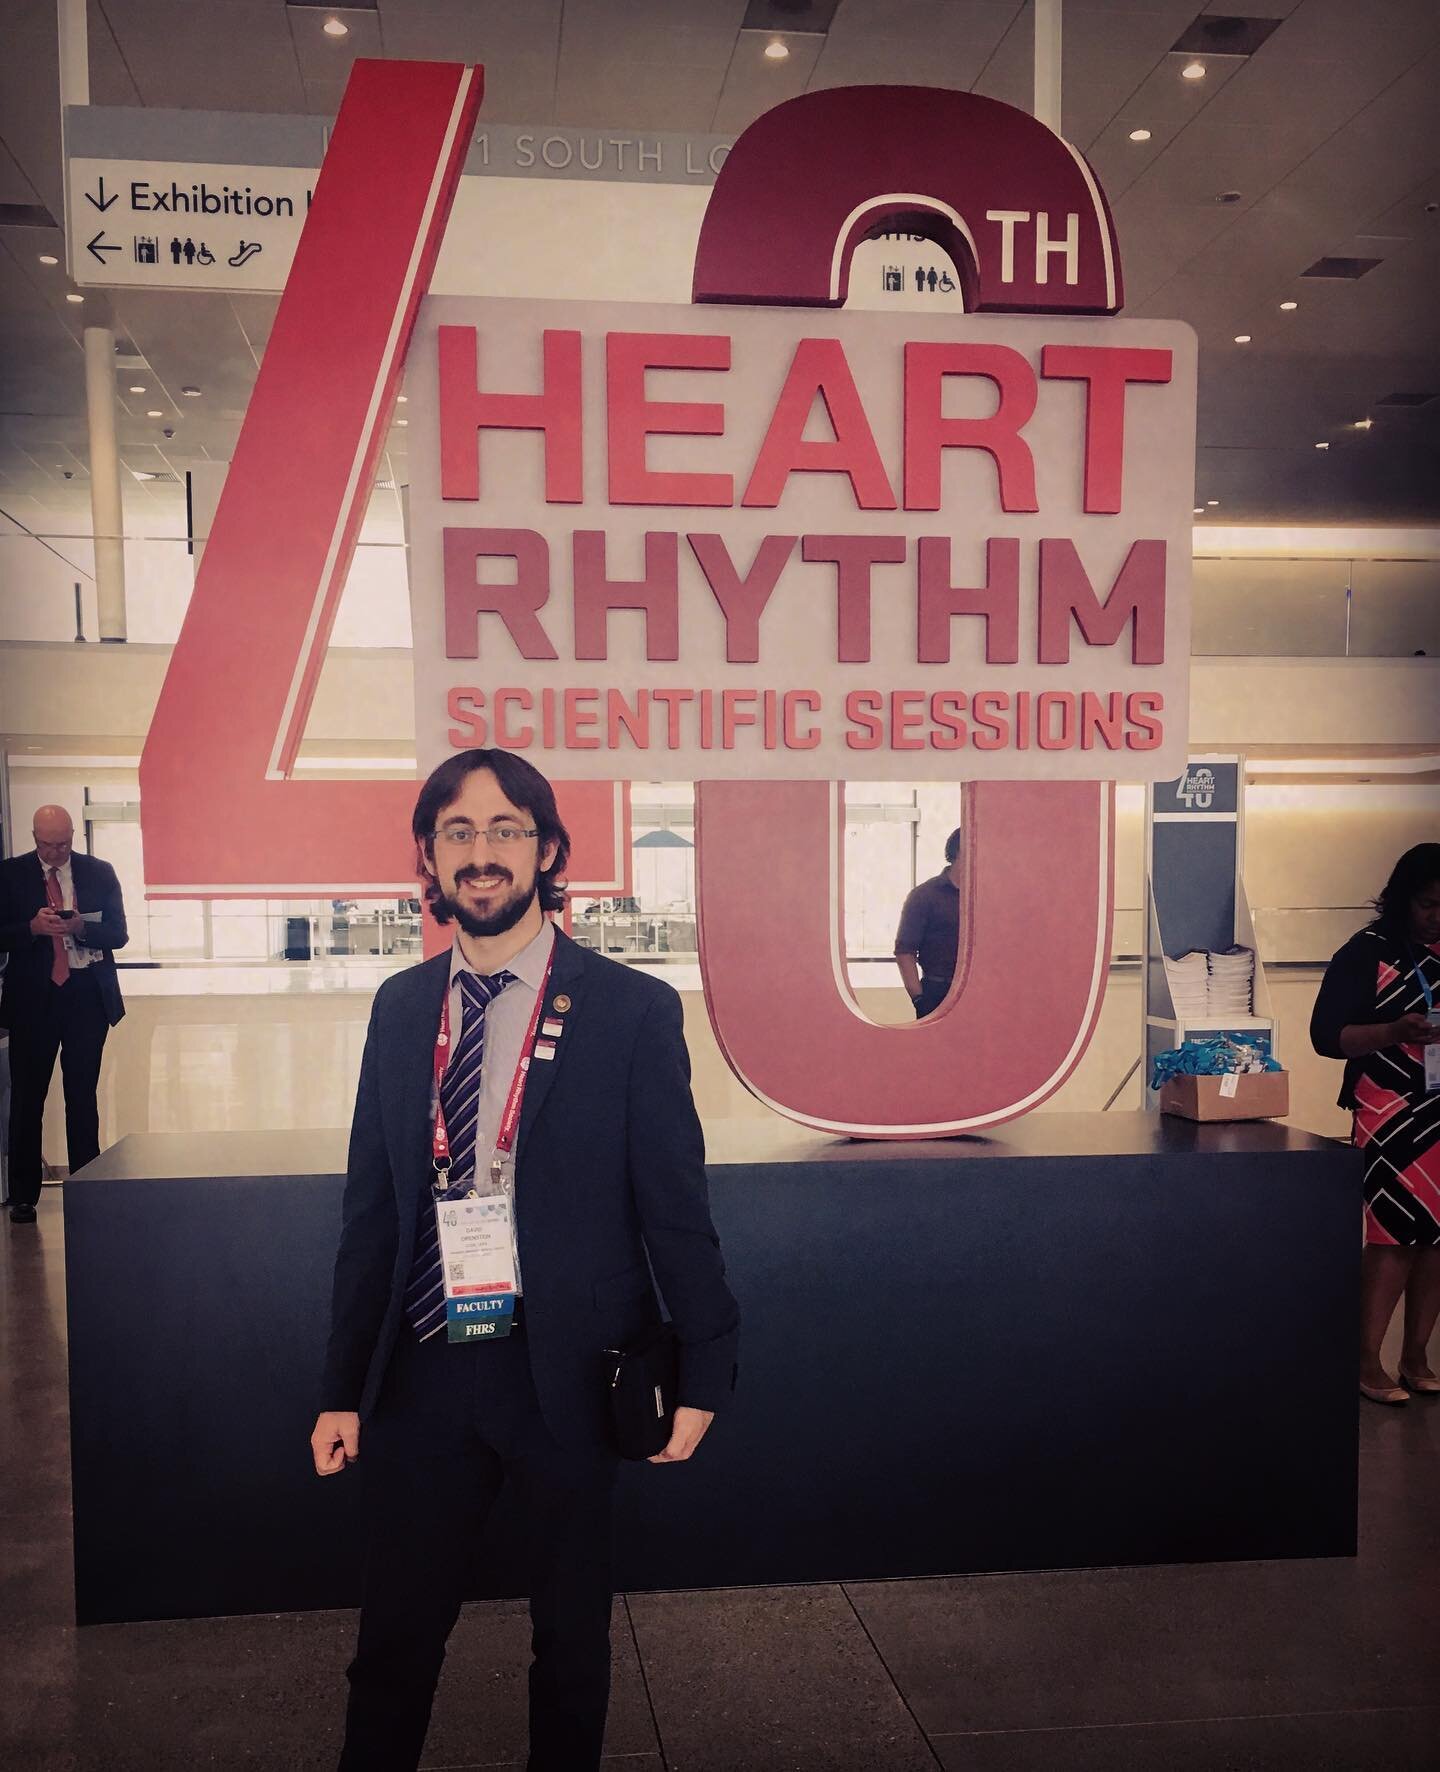 Bring it on!!! ##hrs2019